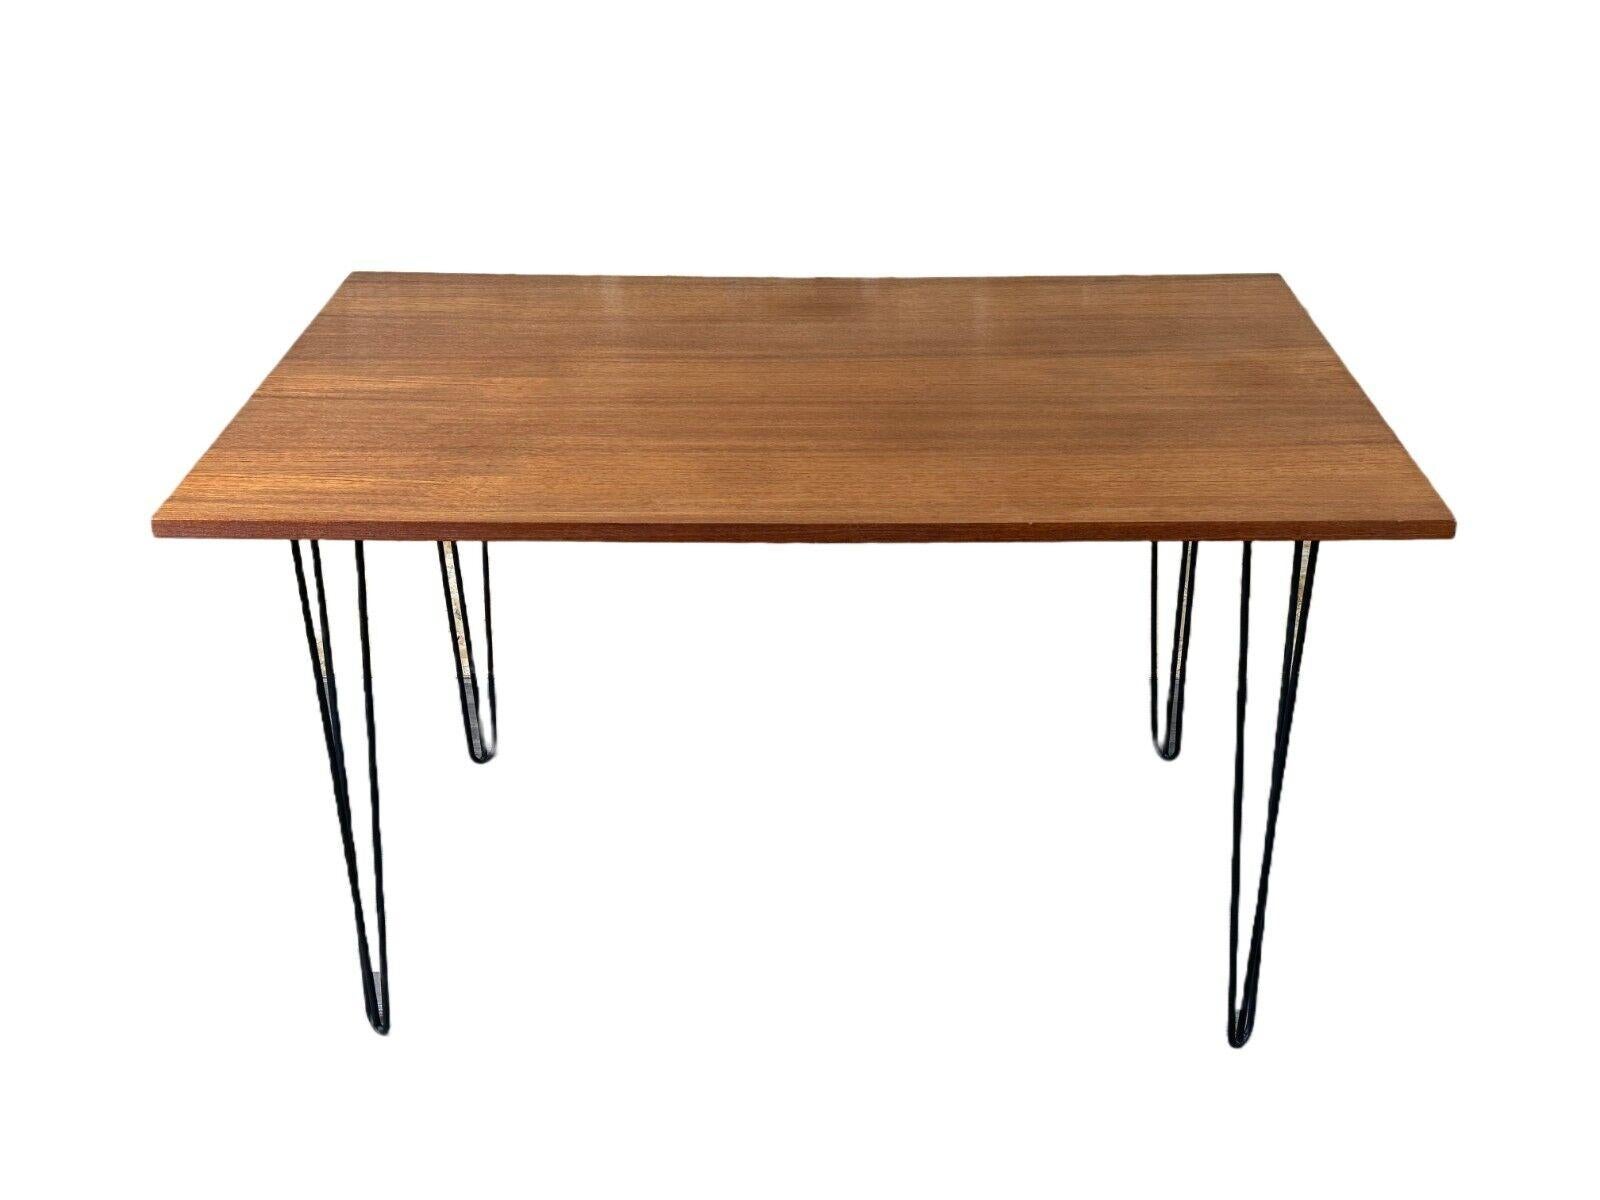 60s 70s Teak & Metal Dining Table Dining Table Danish Modern Design Denmark

Object: dining table / dining table

Manufacturer:

Condition: good - vintage

Age: around 1960-1970

Dimensions:

Width = 123cm
Depth = 79cm
Height = 71cm

Material: